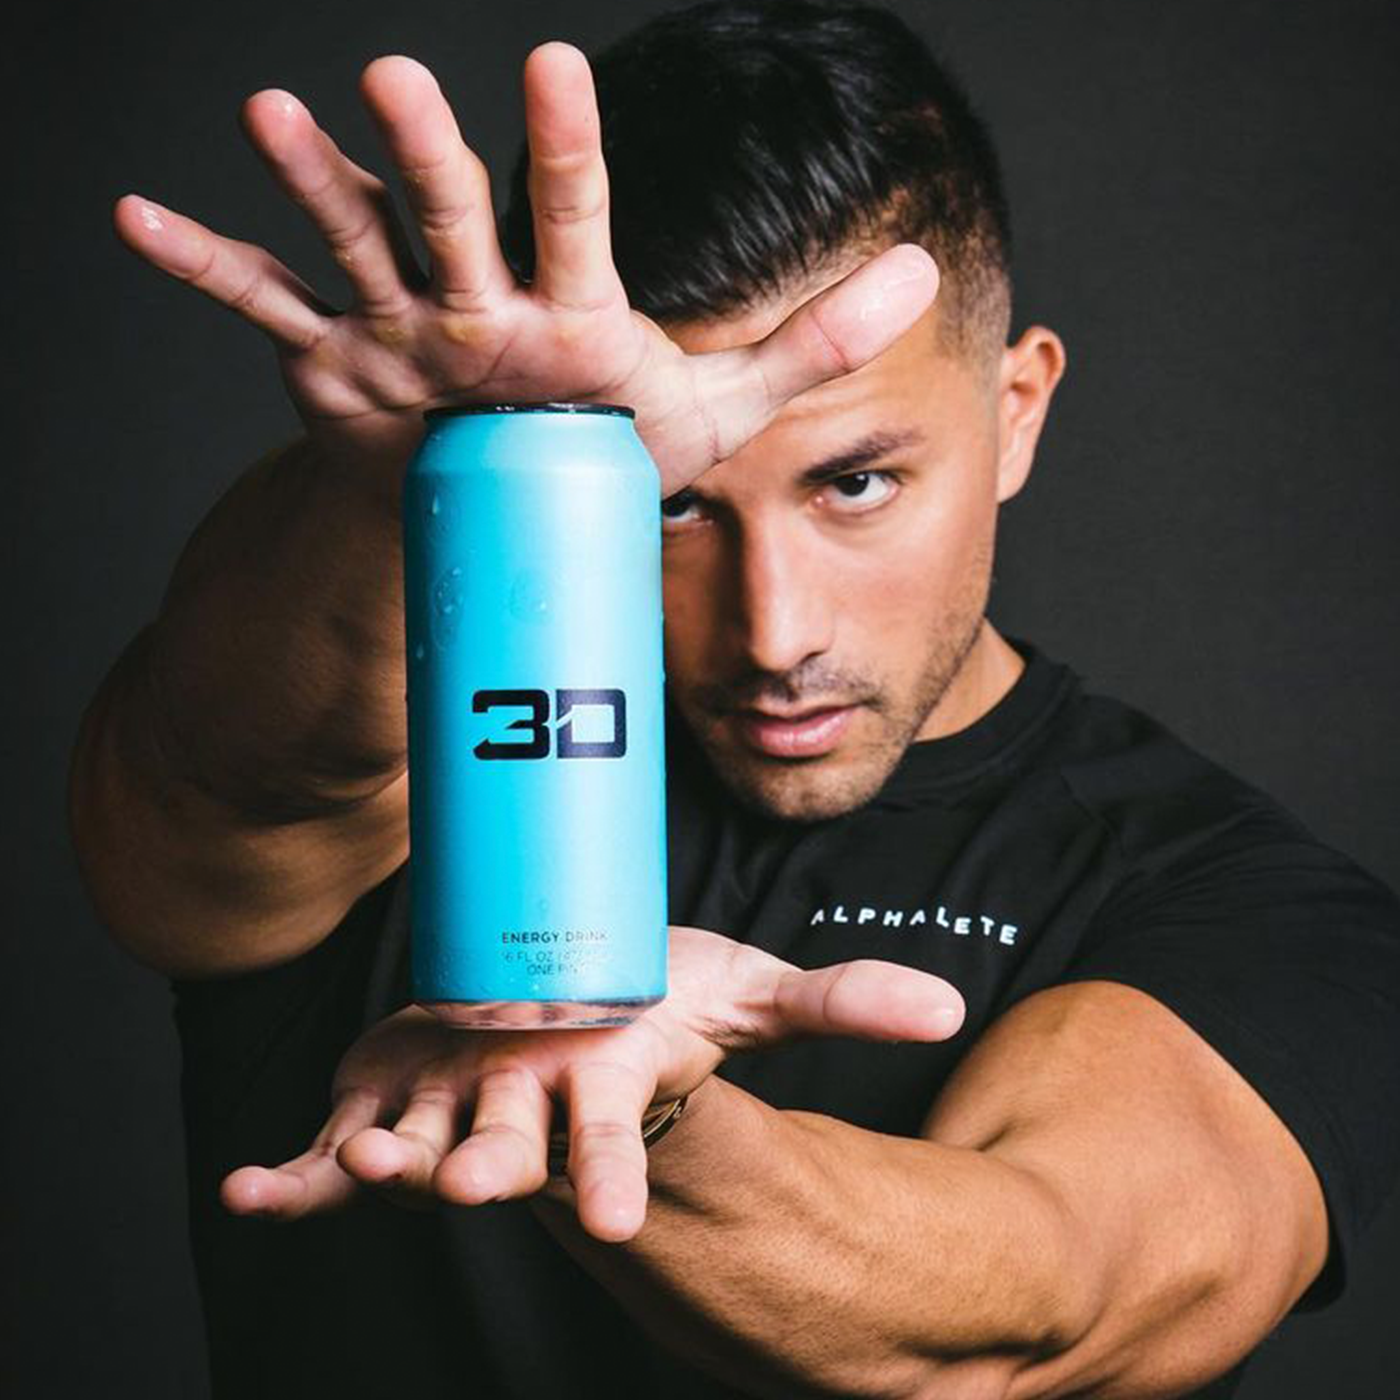 With a confident stance, Christian holds up a berry blue flavored 3D Energy drink, his hand artfully emphasizing the can in a lively gesture that draws attention to the vibrant product.